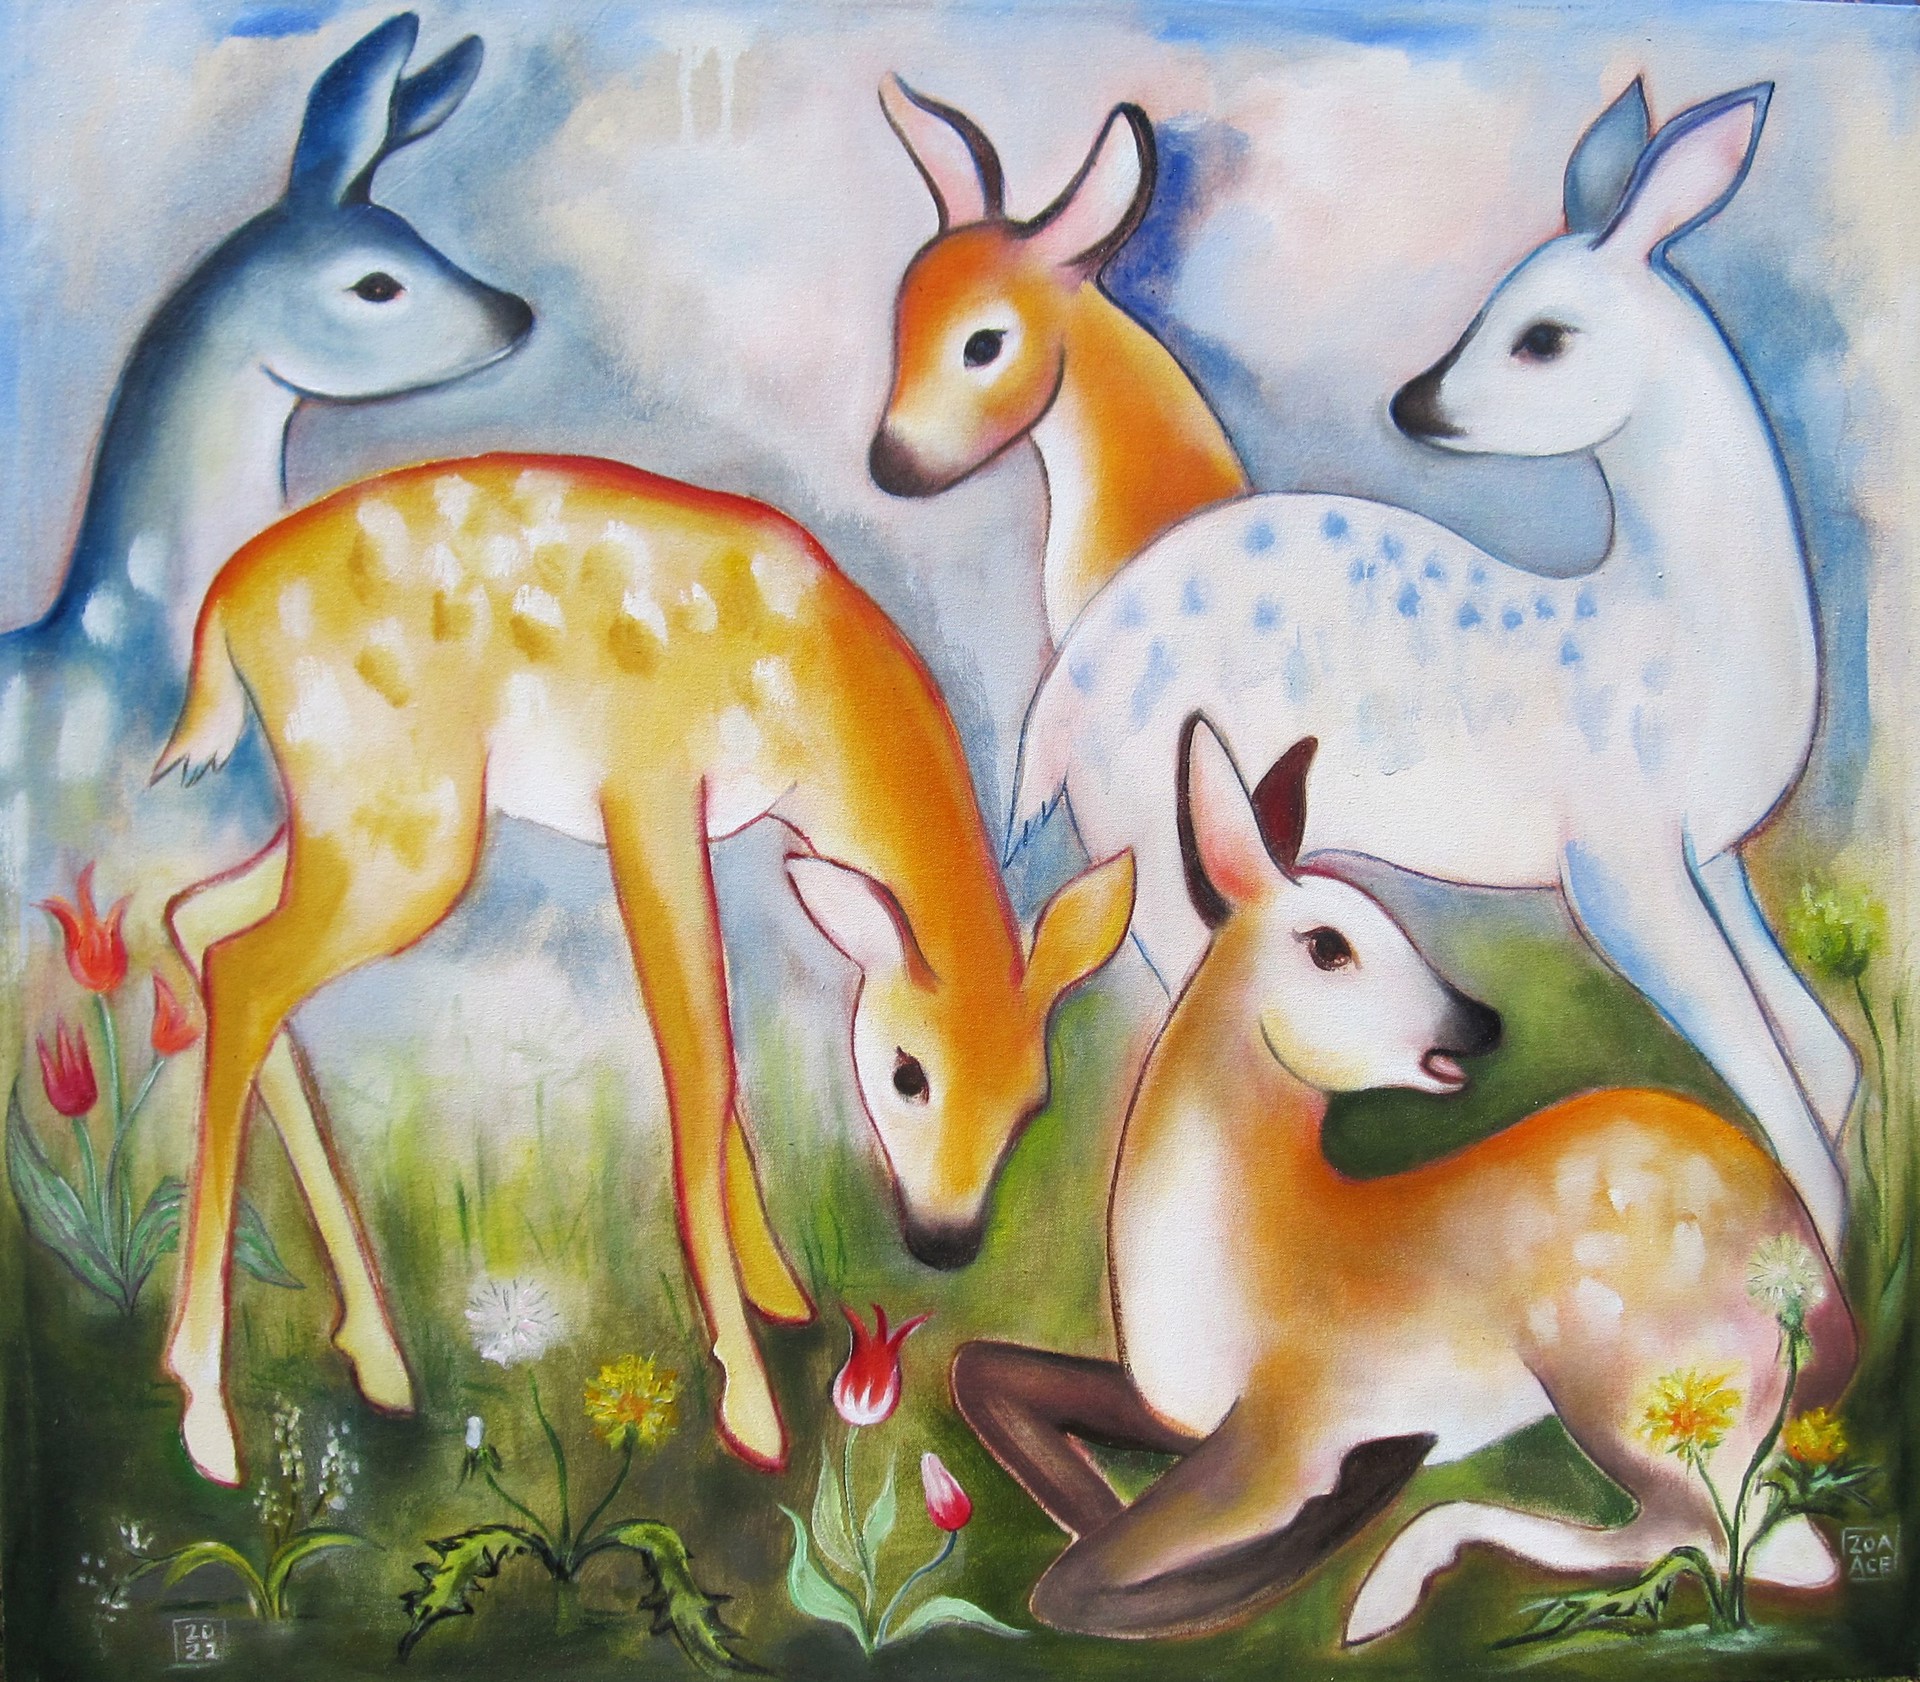 Forest Fawns by Zoa Ace